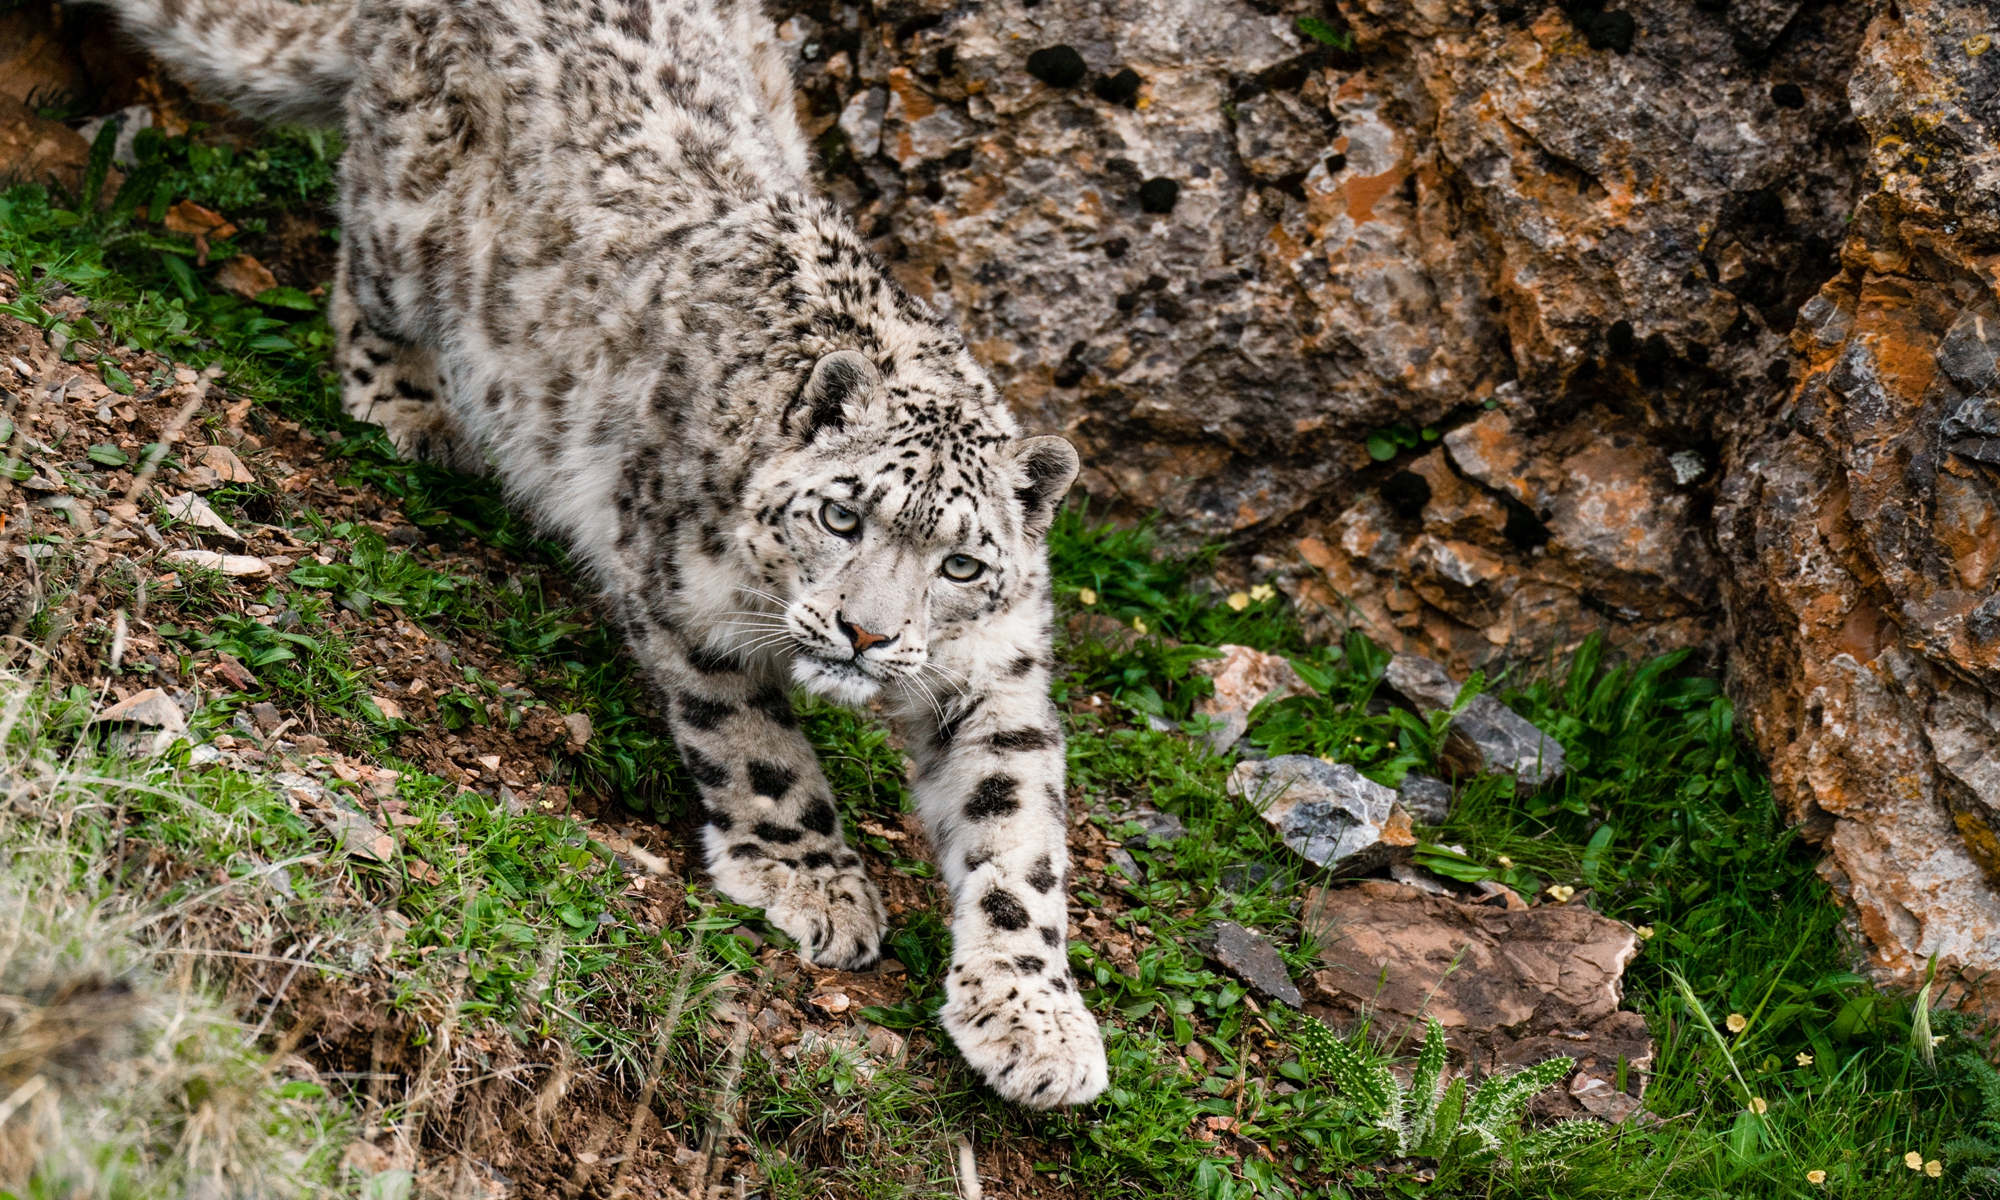 A snow leopard descends from among the rocks in the Sanjiangyuan region. Photo: Courtesy of Xi Zhinong